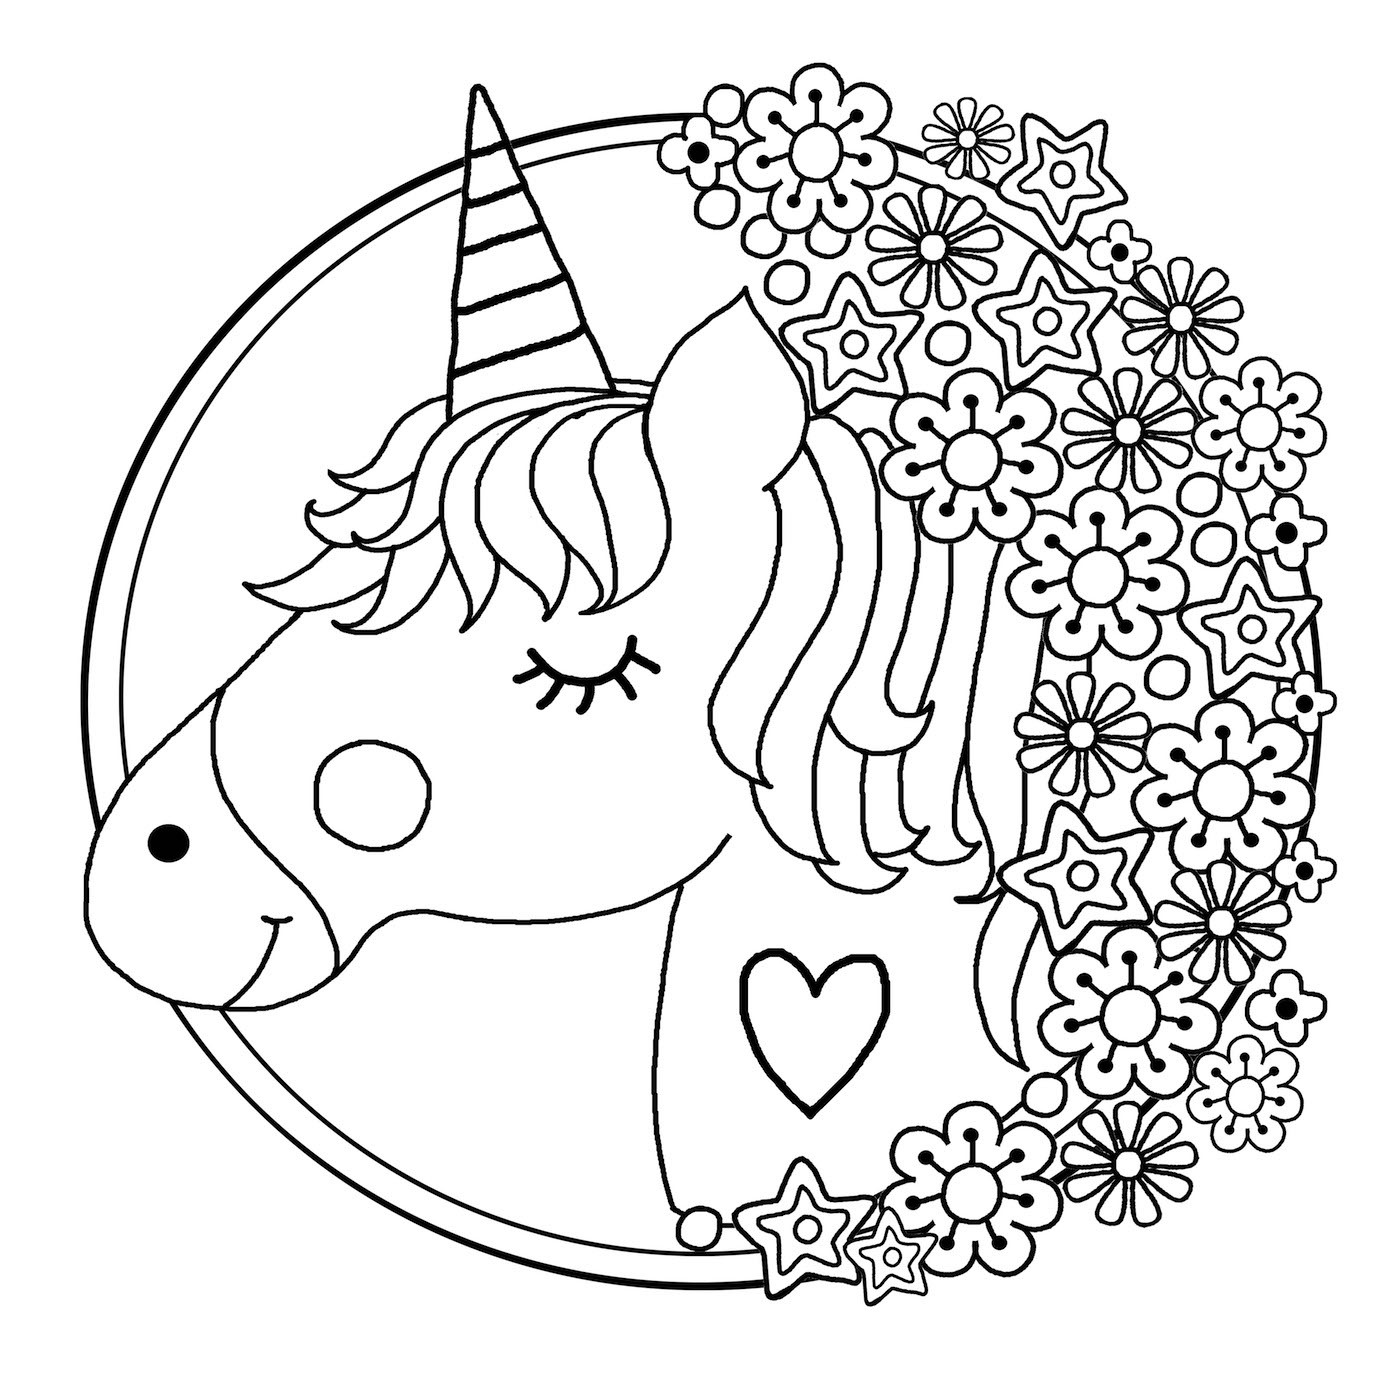 Free Printable Coloring Pages Of Unicorns
 Downloadable unicorn colouring page Michael O Mara Books